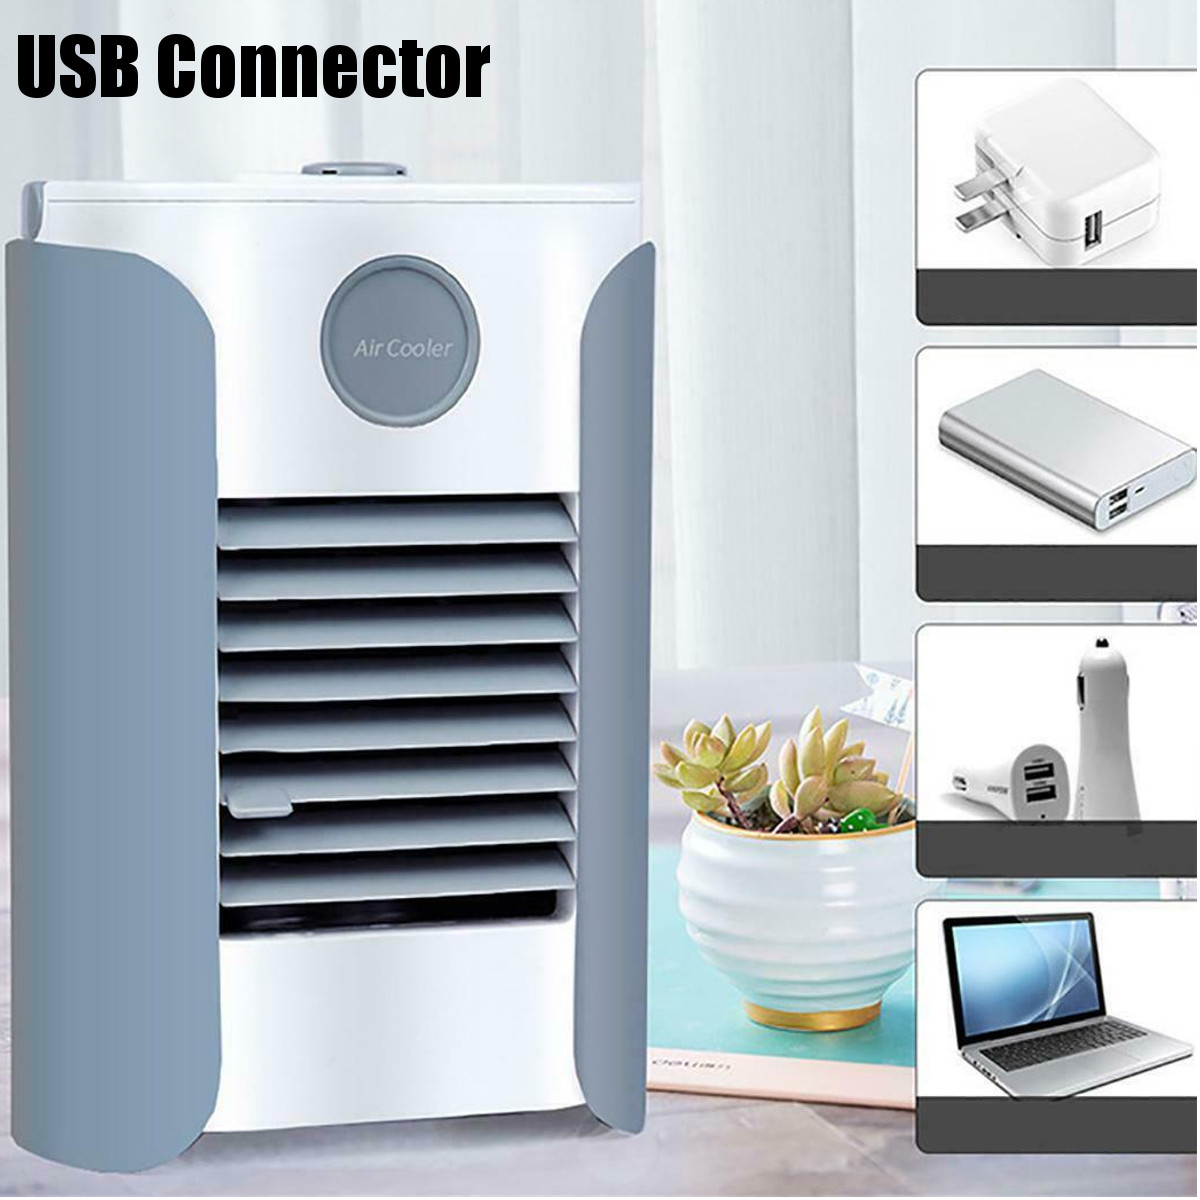 USB-Mini-Portable-Bluetooth-Radio-Air-Cooler-Humidifier-Conditioning-Mute-Spray-Cooling-Fan-1690137-5